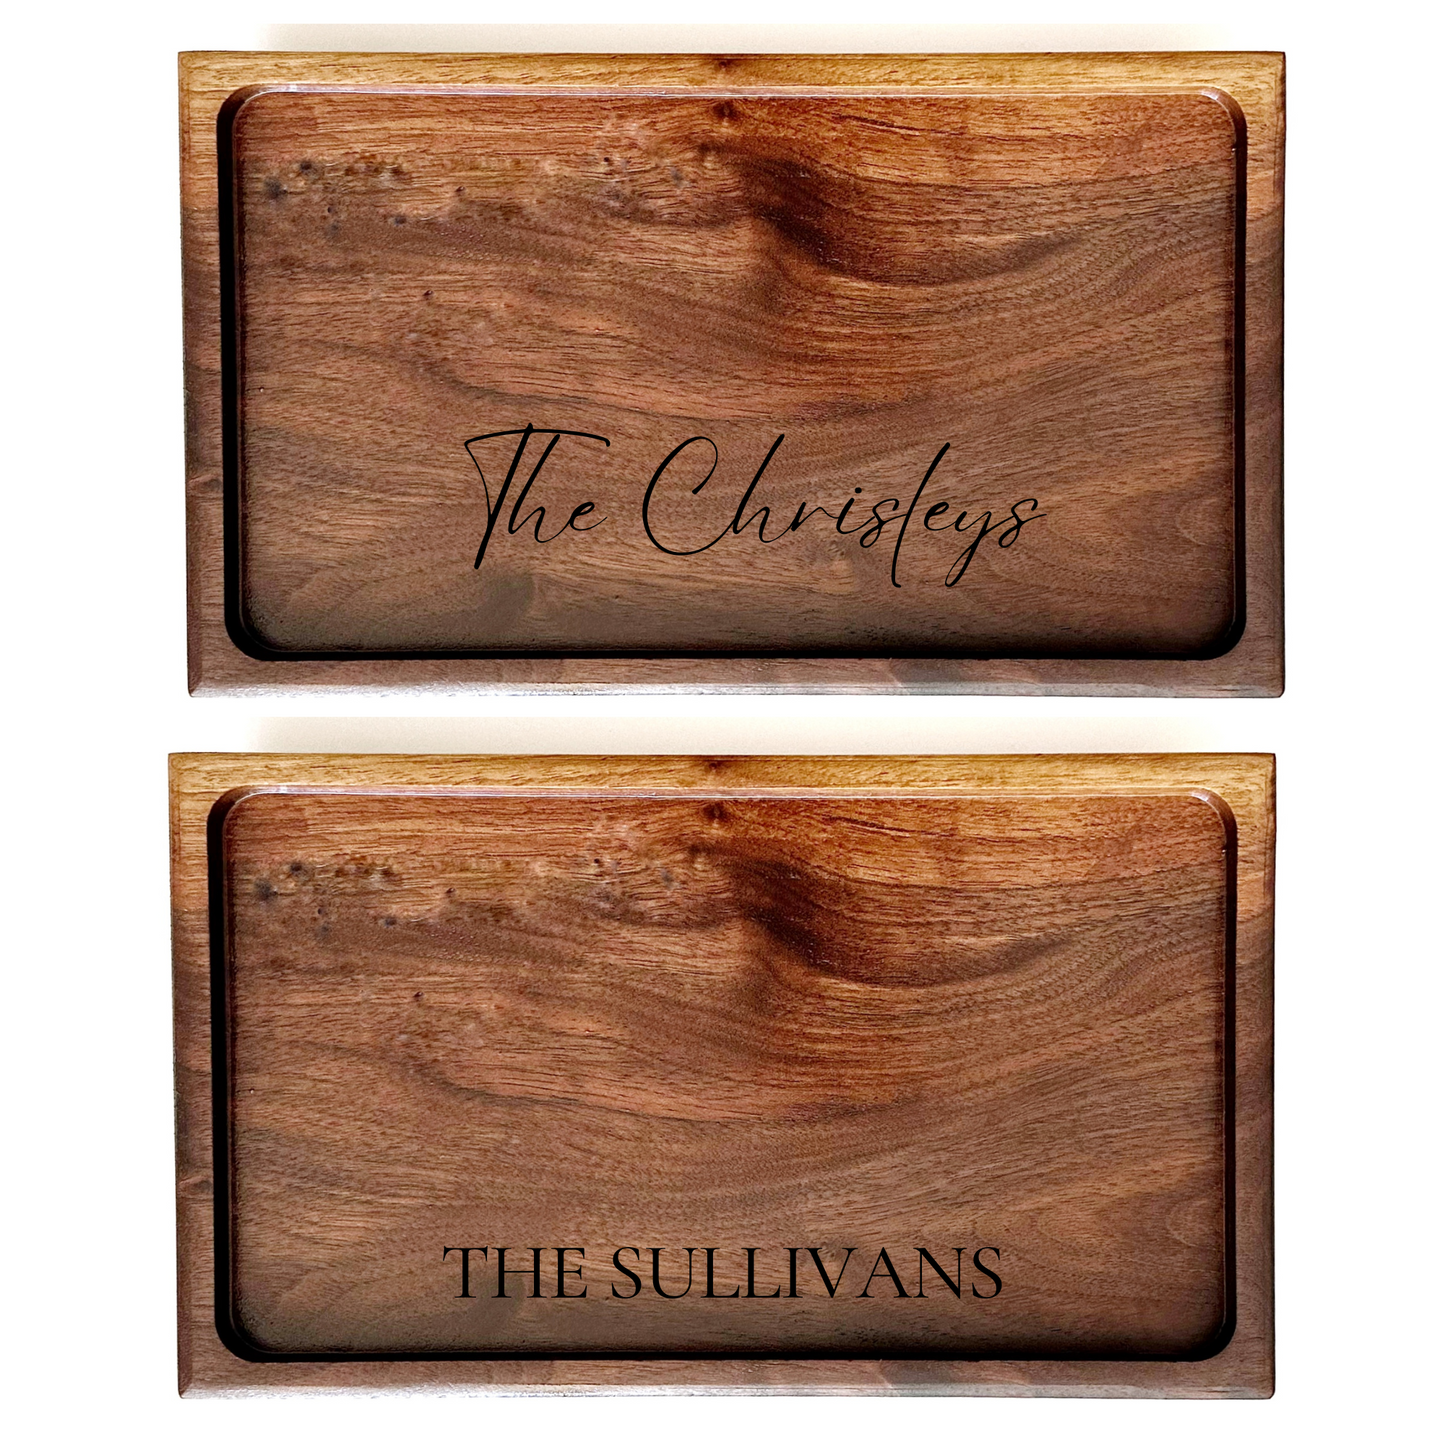 Anniversary celebration - gifts on a personalized wooden tray